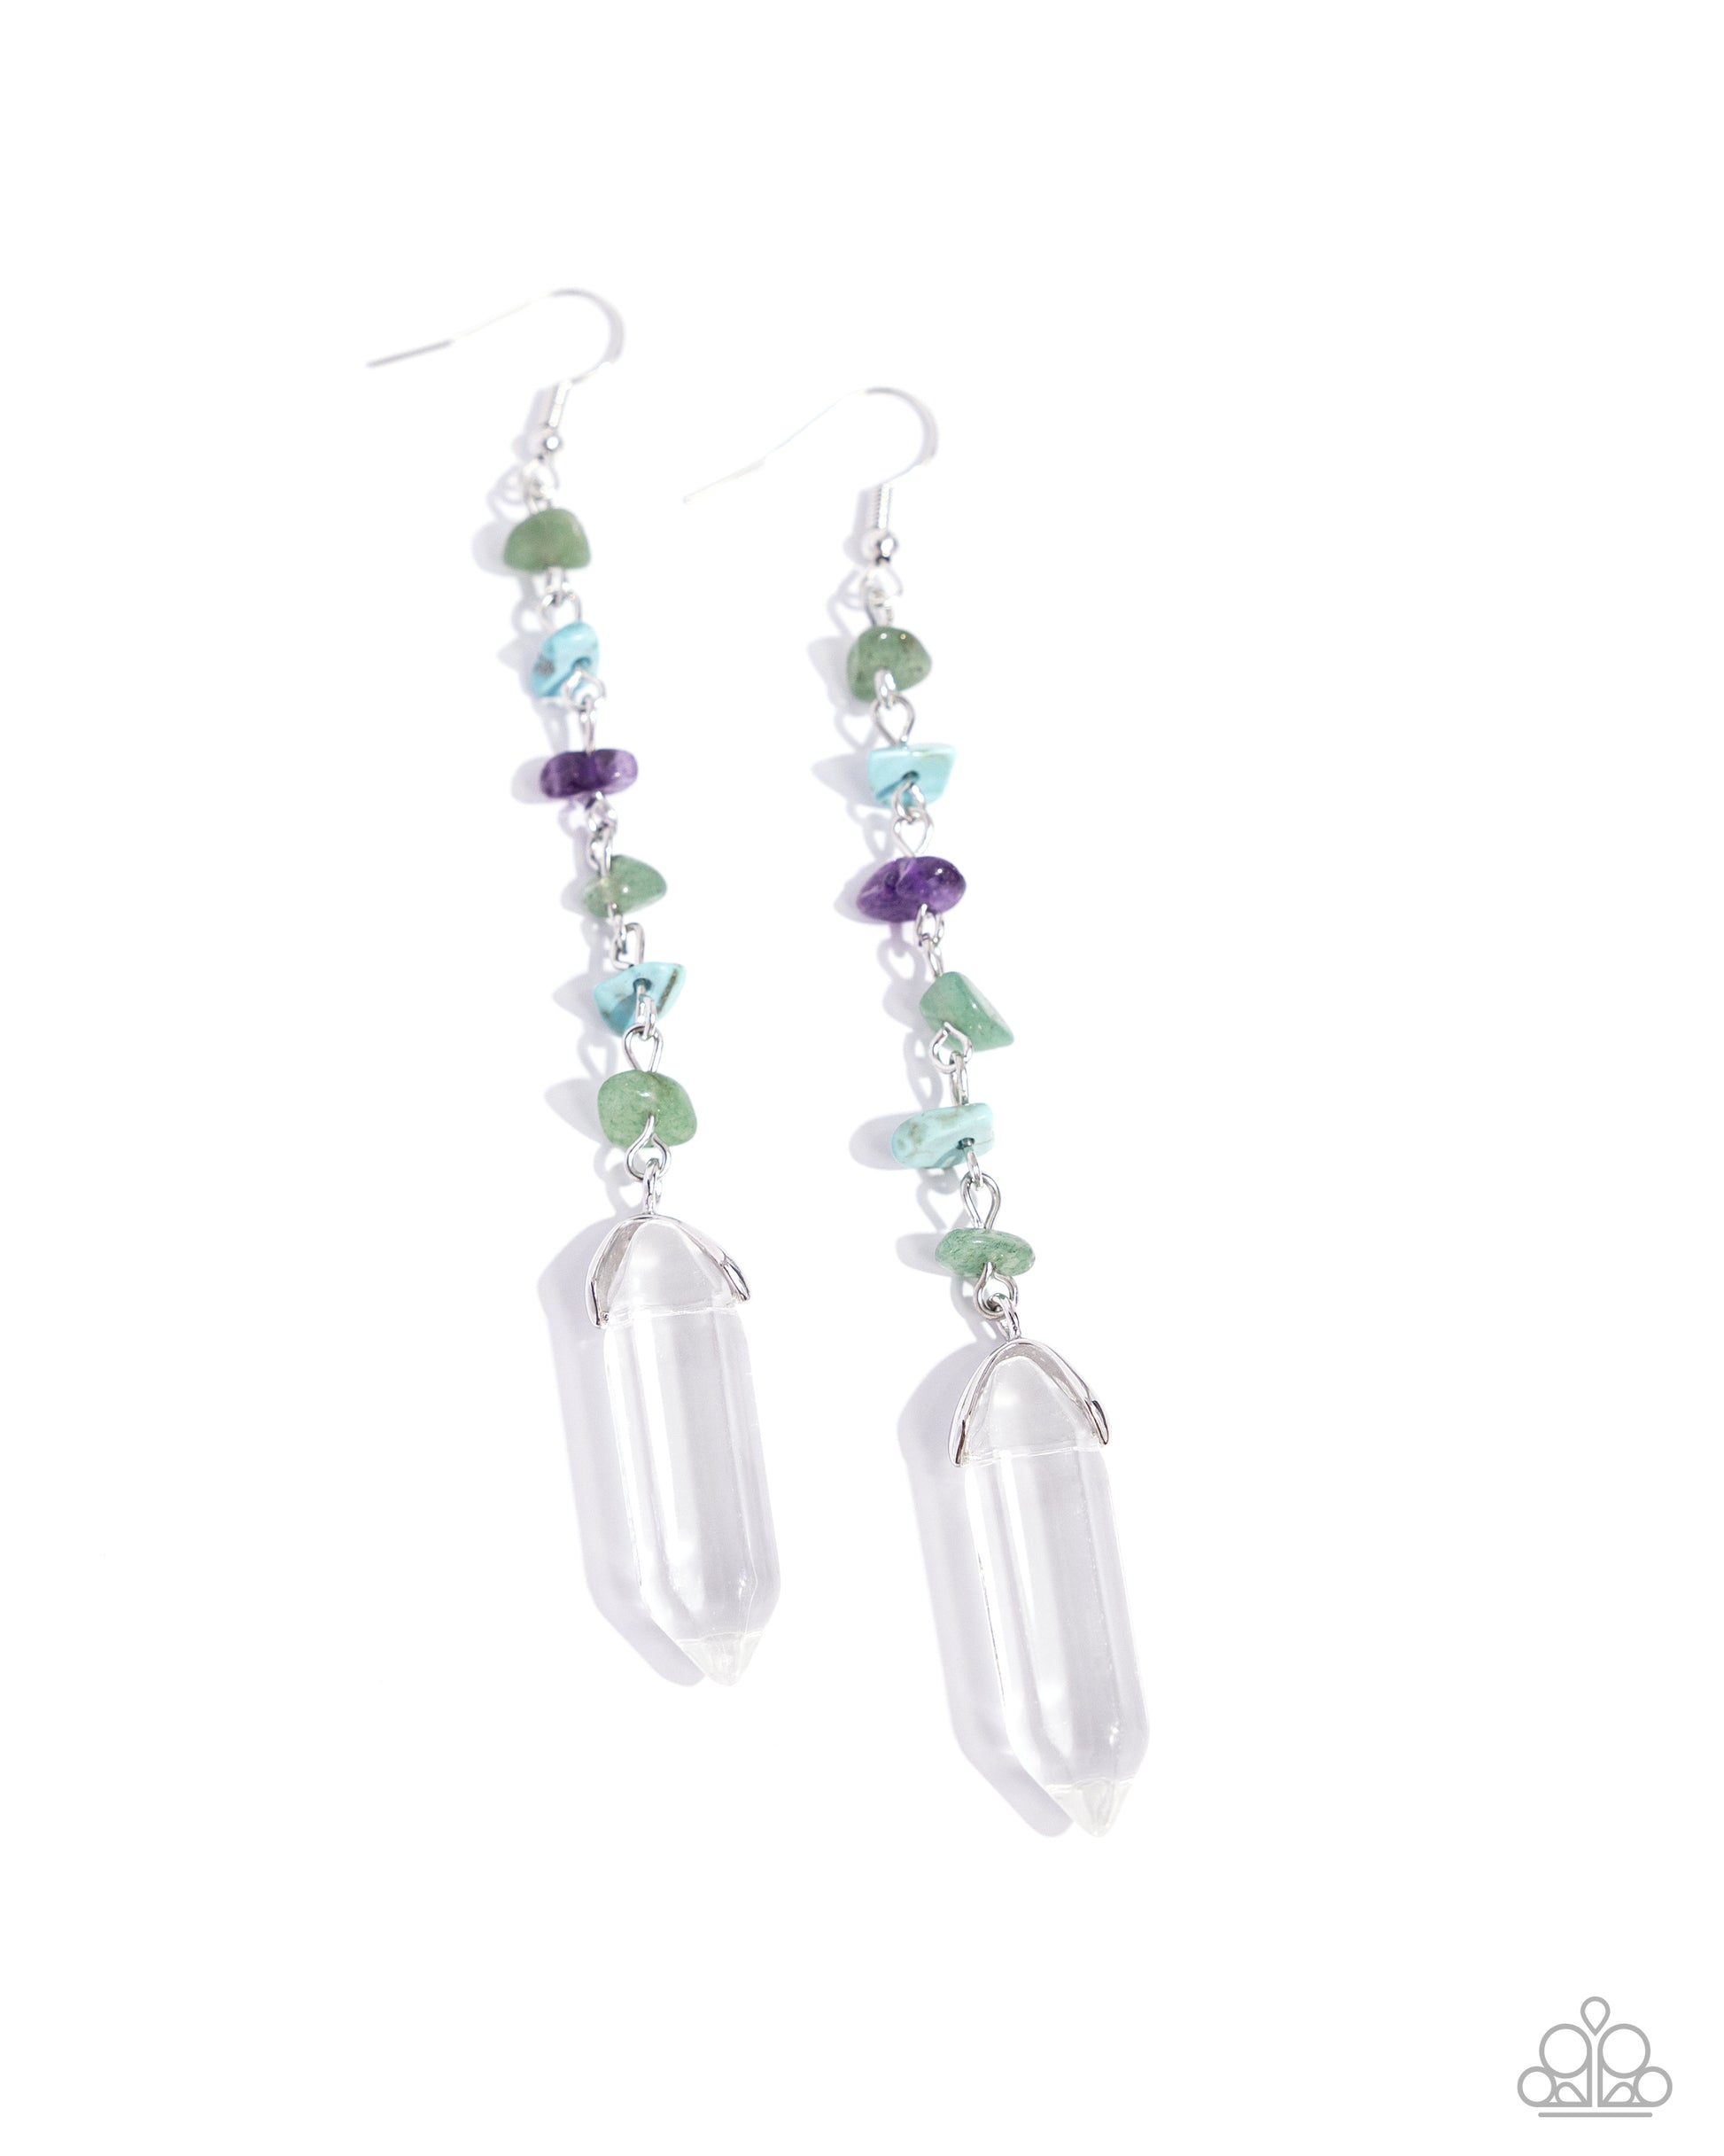 Paparazzi Accessories - Quartz Qualification - Green Earrings chiseled jade, turquoise, and amethyst stones connect down the ear along a silver chain, leading the eye to a clear quartz-like piece at its end for an elegantly earthy lure. Earring attaches to a standard fishhook fitting. As the stone elements in this piece are natural, some color variation is normal. Sold as one pair of earrings.